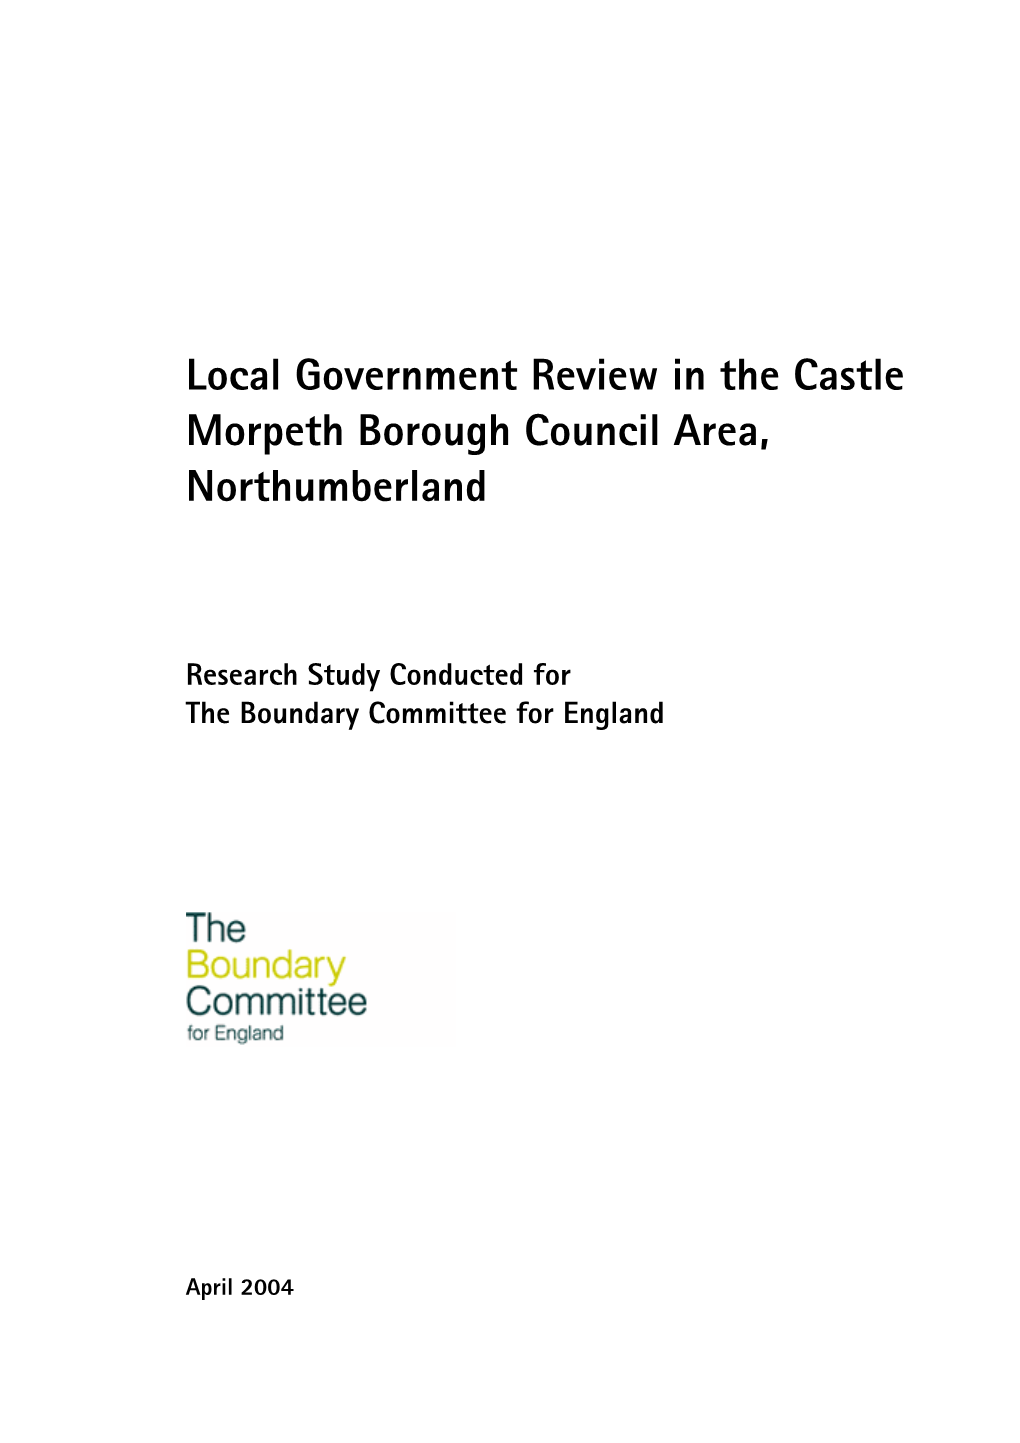 Local Government Review in the Castle Morpeth Borough Council Area, Northumberland